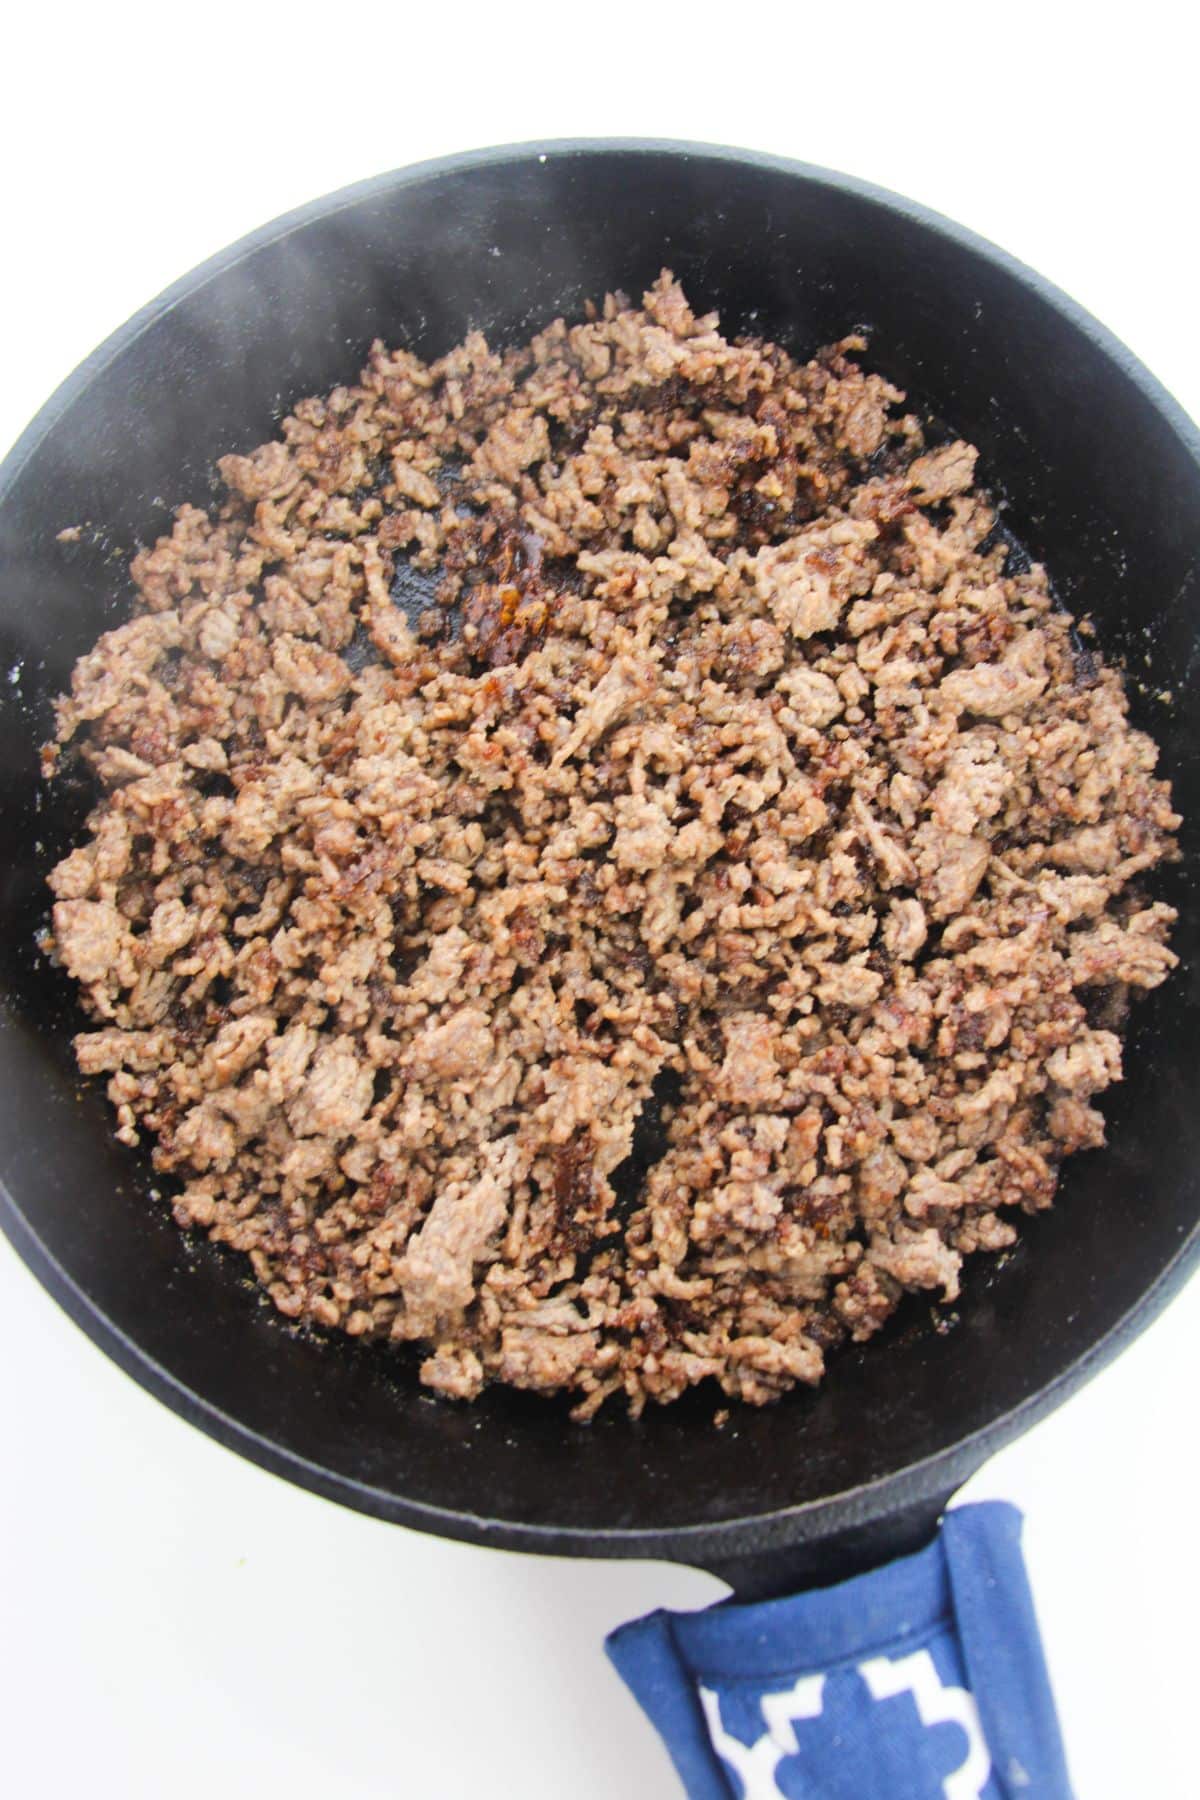 Cooked ground beef in skillet.